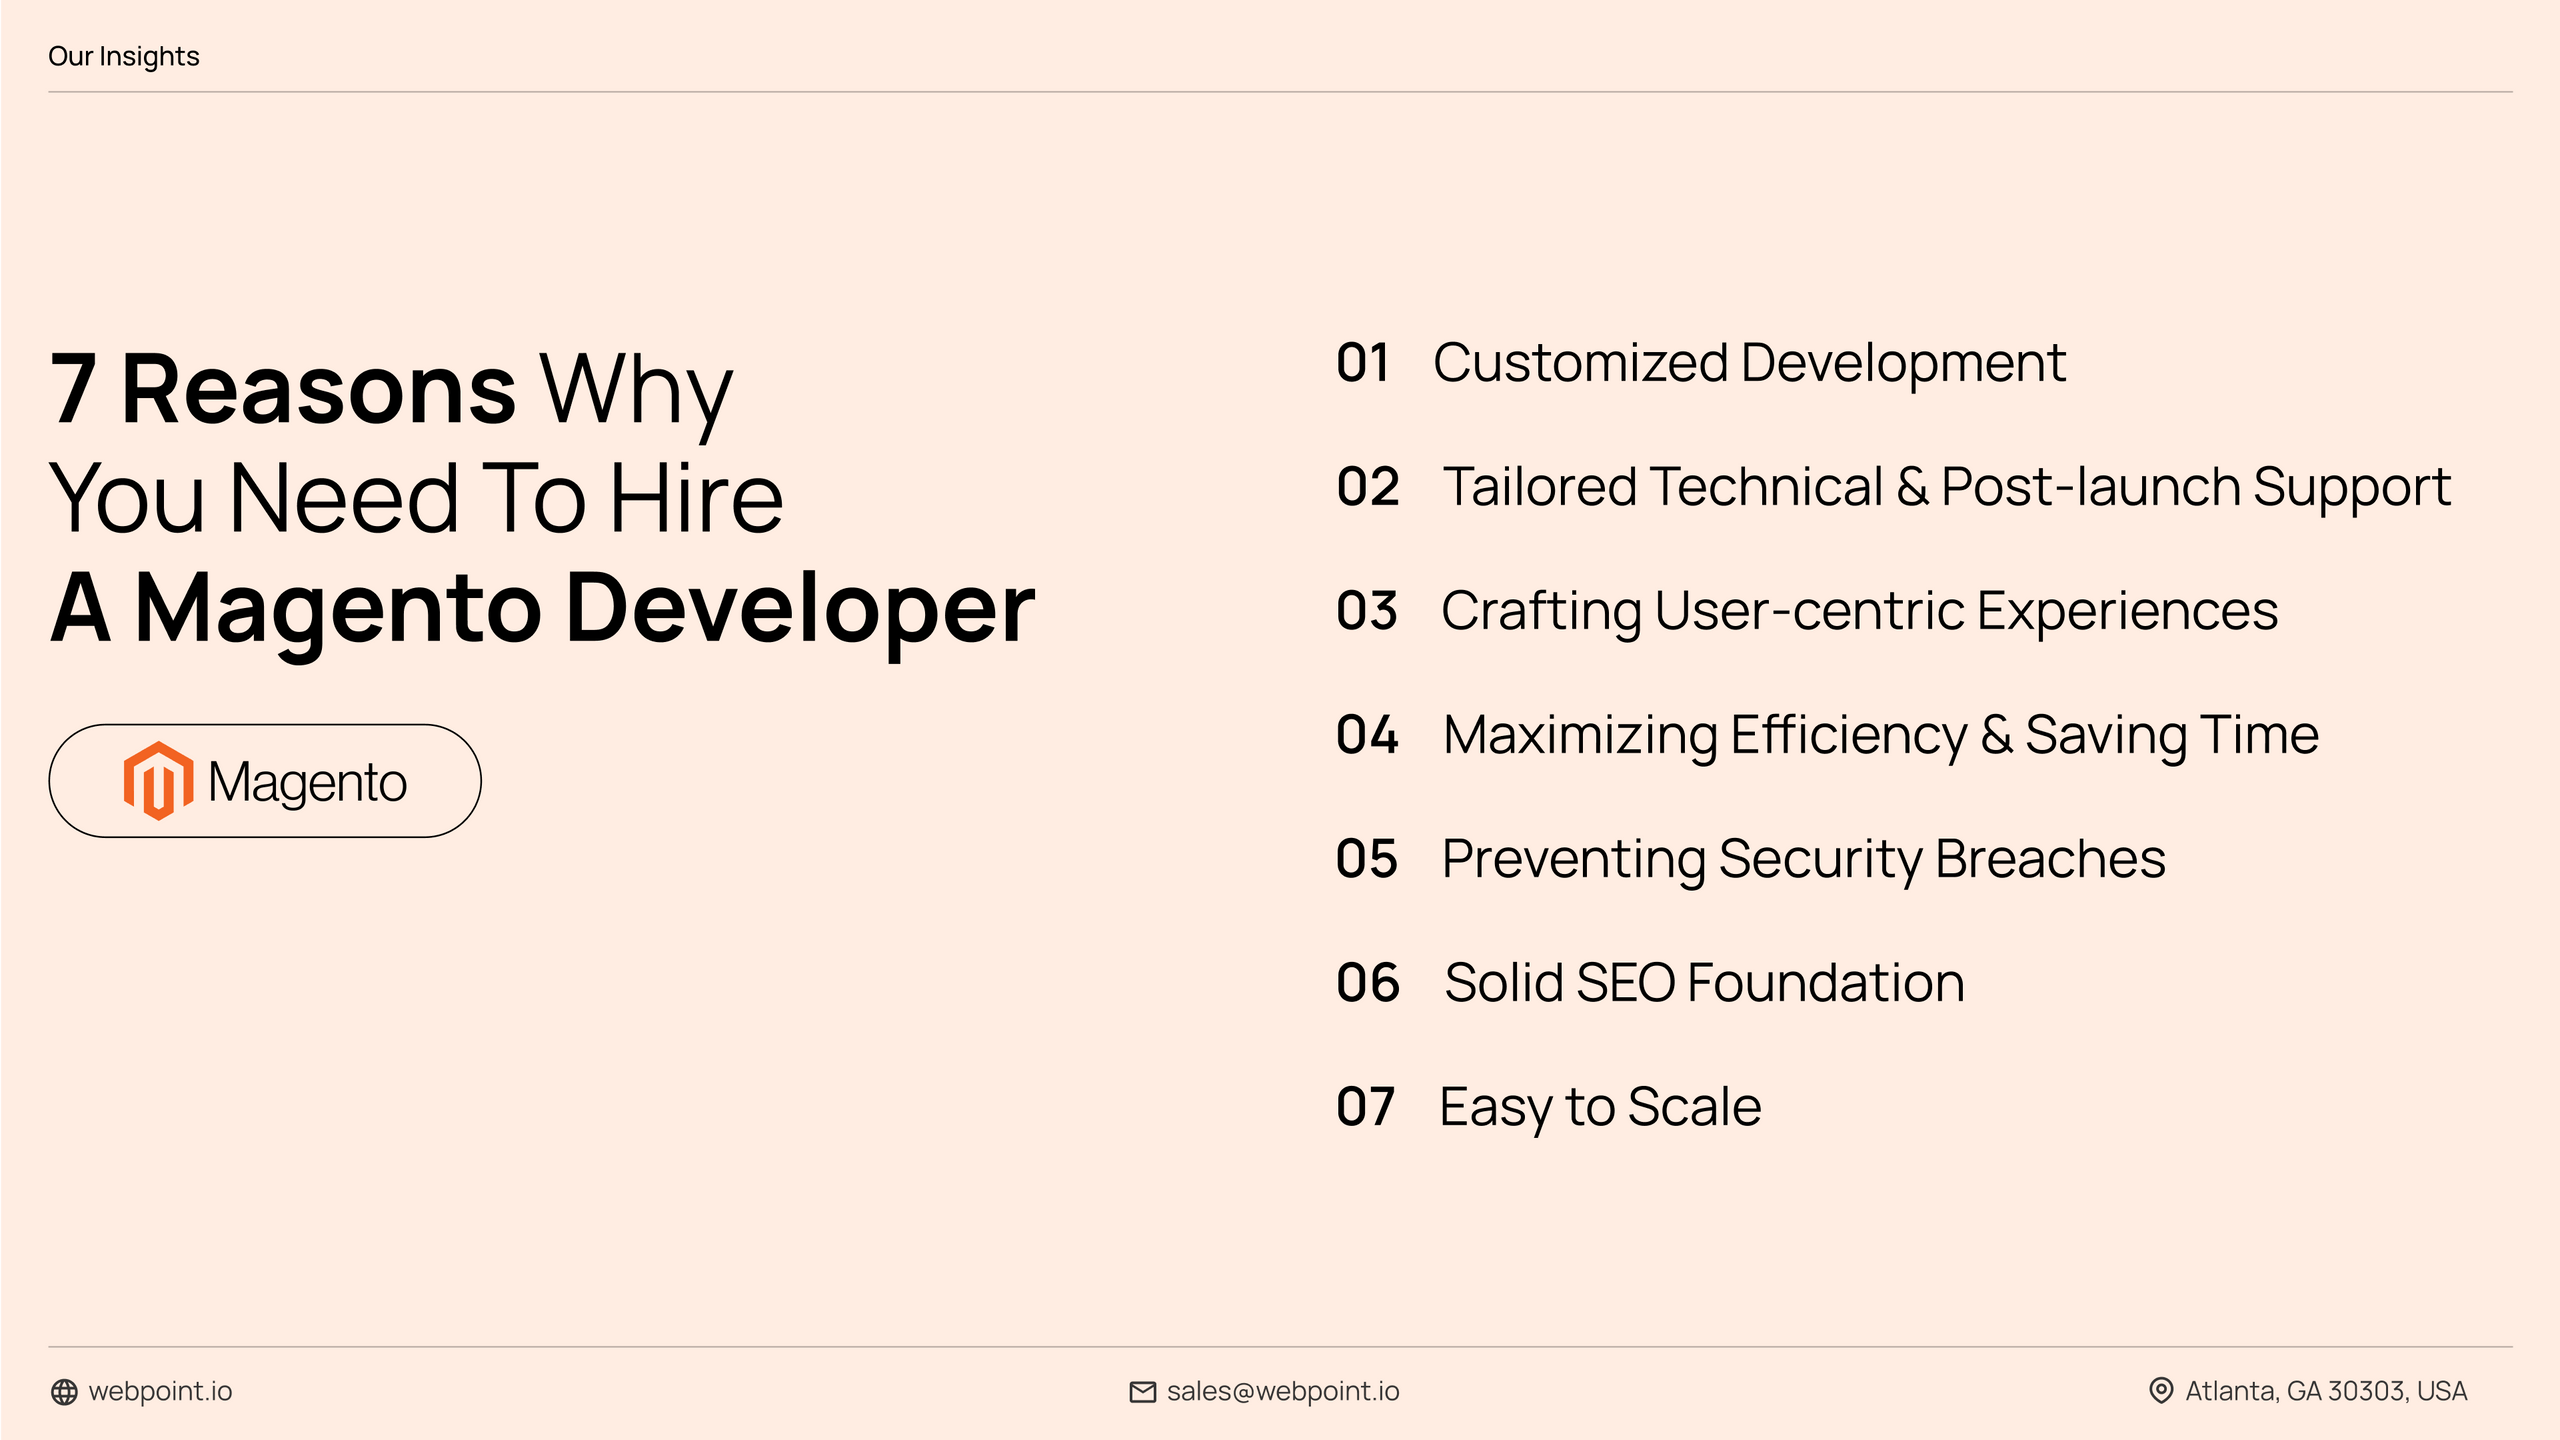 7 reasons why you need to hire a magento developer for your ecommerce project